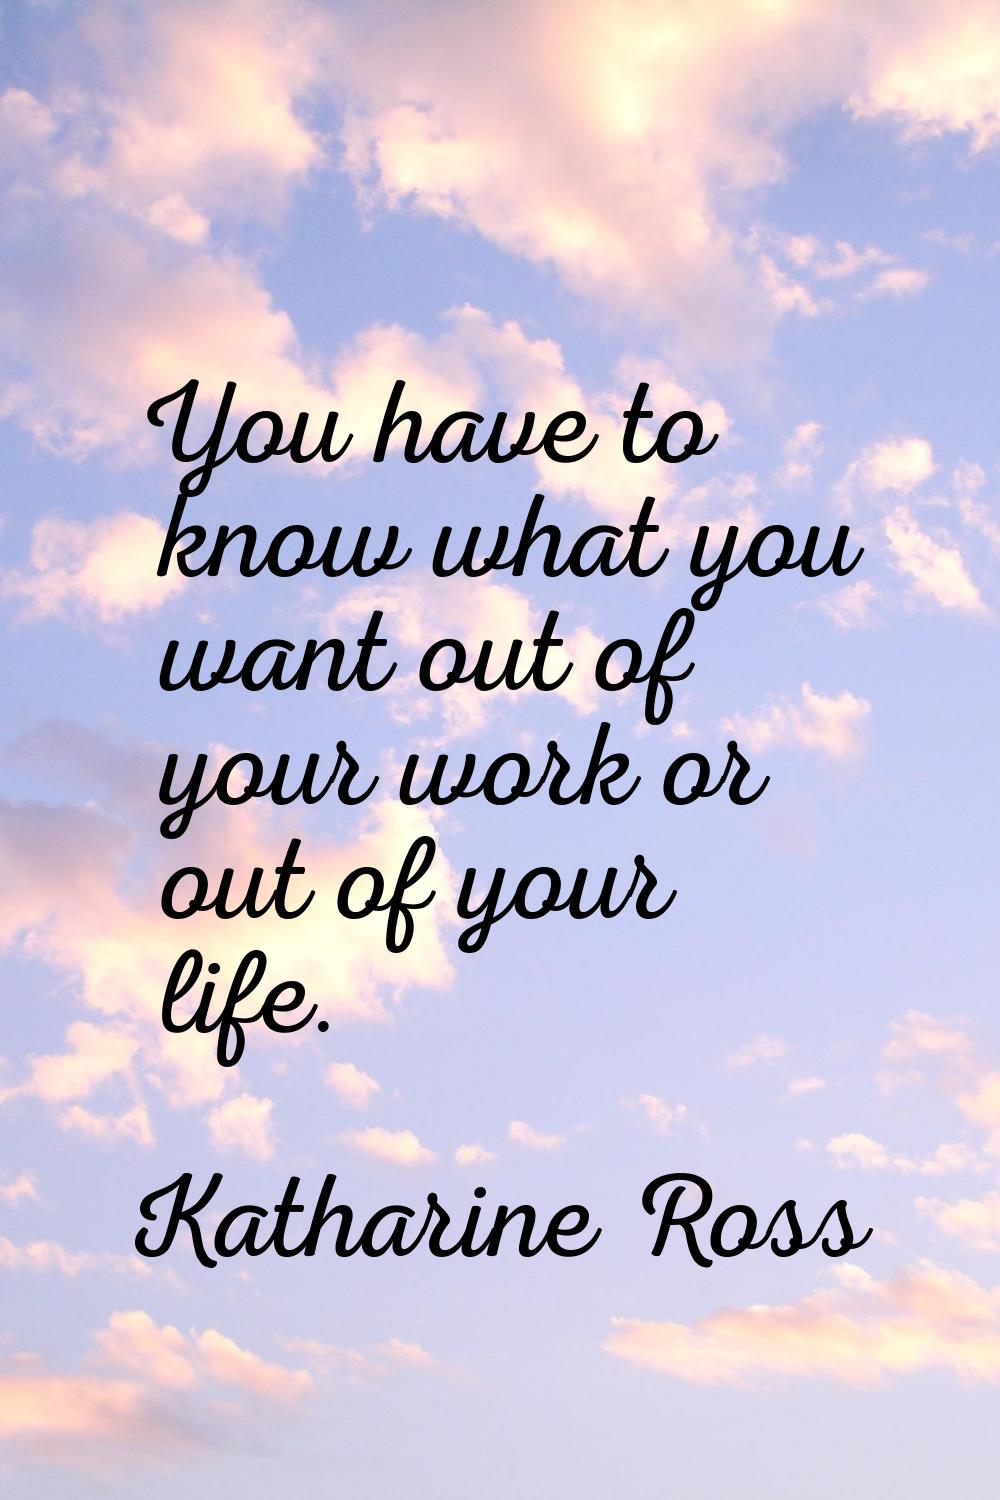 You have to know what you want out of your work or out of your life.